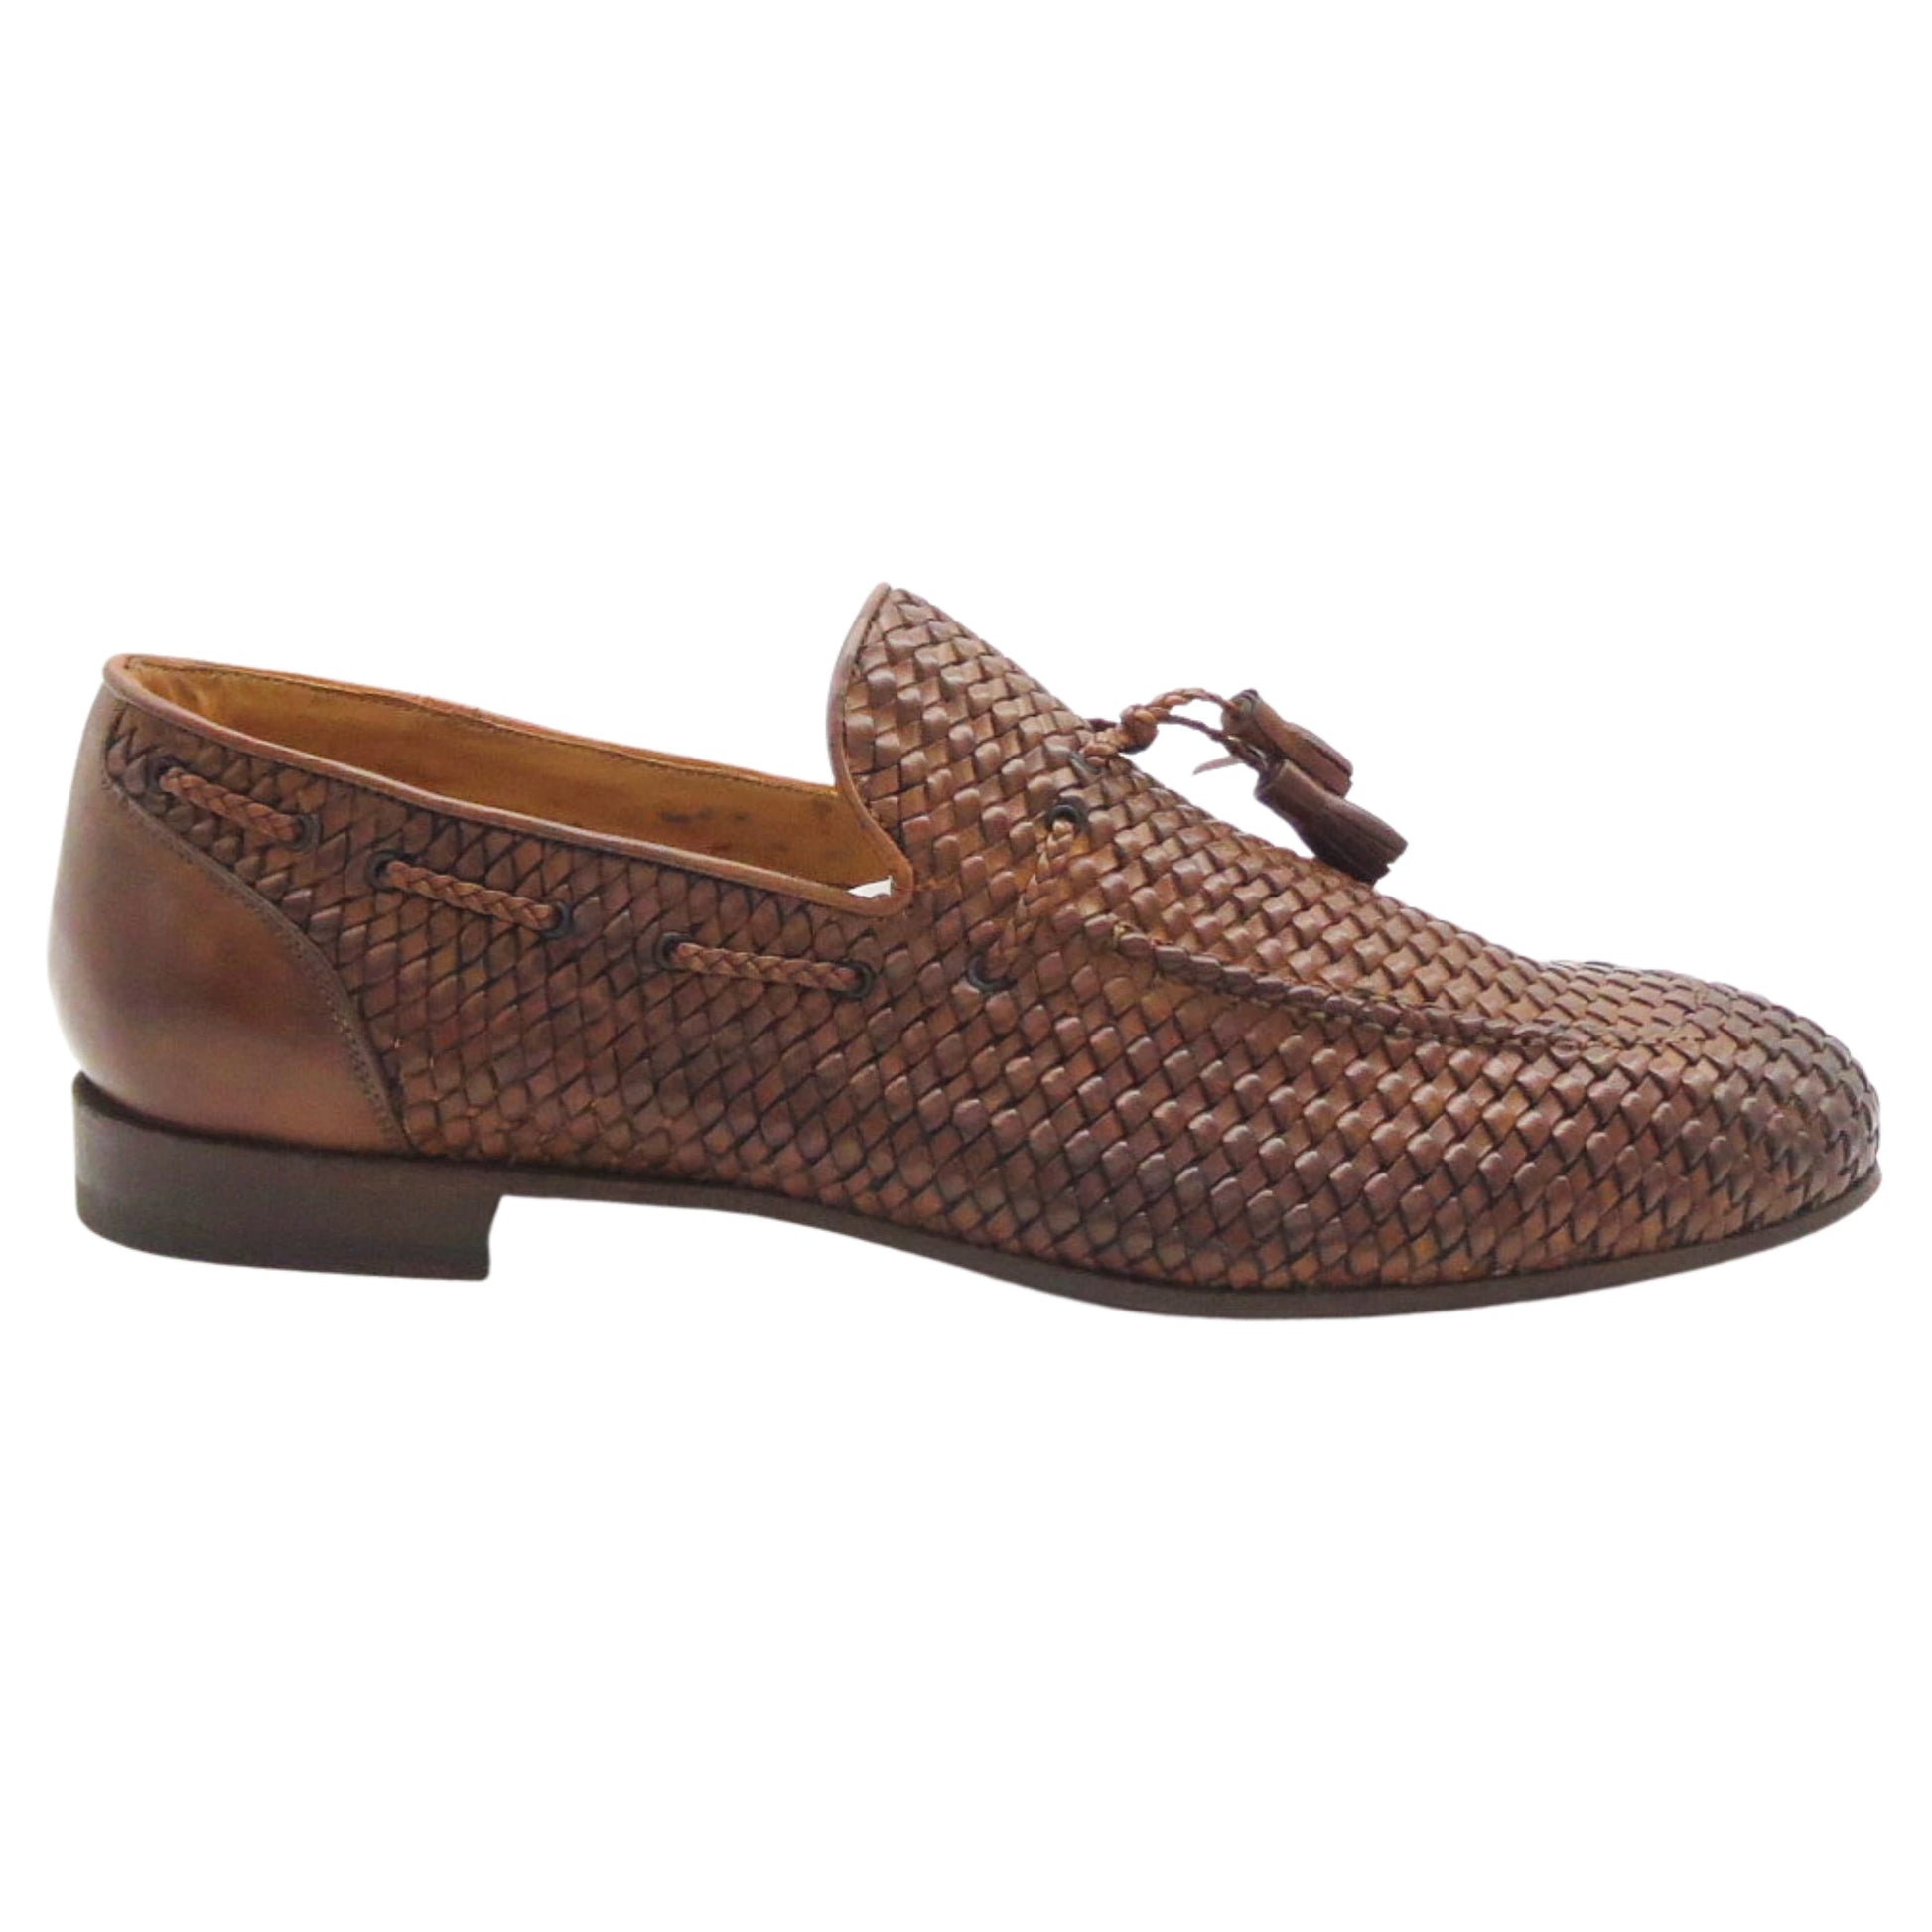 Men's Genuine Leather Italian Elegant Hand Woven Moccasin with Tassels in Siena (BR9495)Shop Handmade Italian leather moccasin with tassels in Brown (9495) or browse our range of hand-made Italian moccasins & loafers for men in leather or suede in-store at Aliverti Durban or Cape Town, or shop online. We deliver in South Africa & offer multiple payment plans as well as accept multiple safe & secure payment methods.